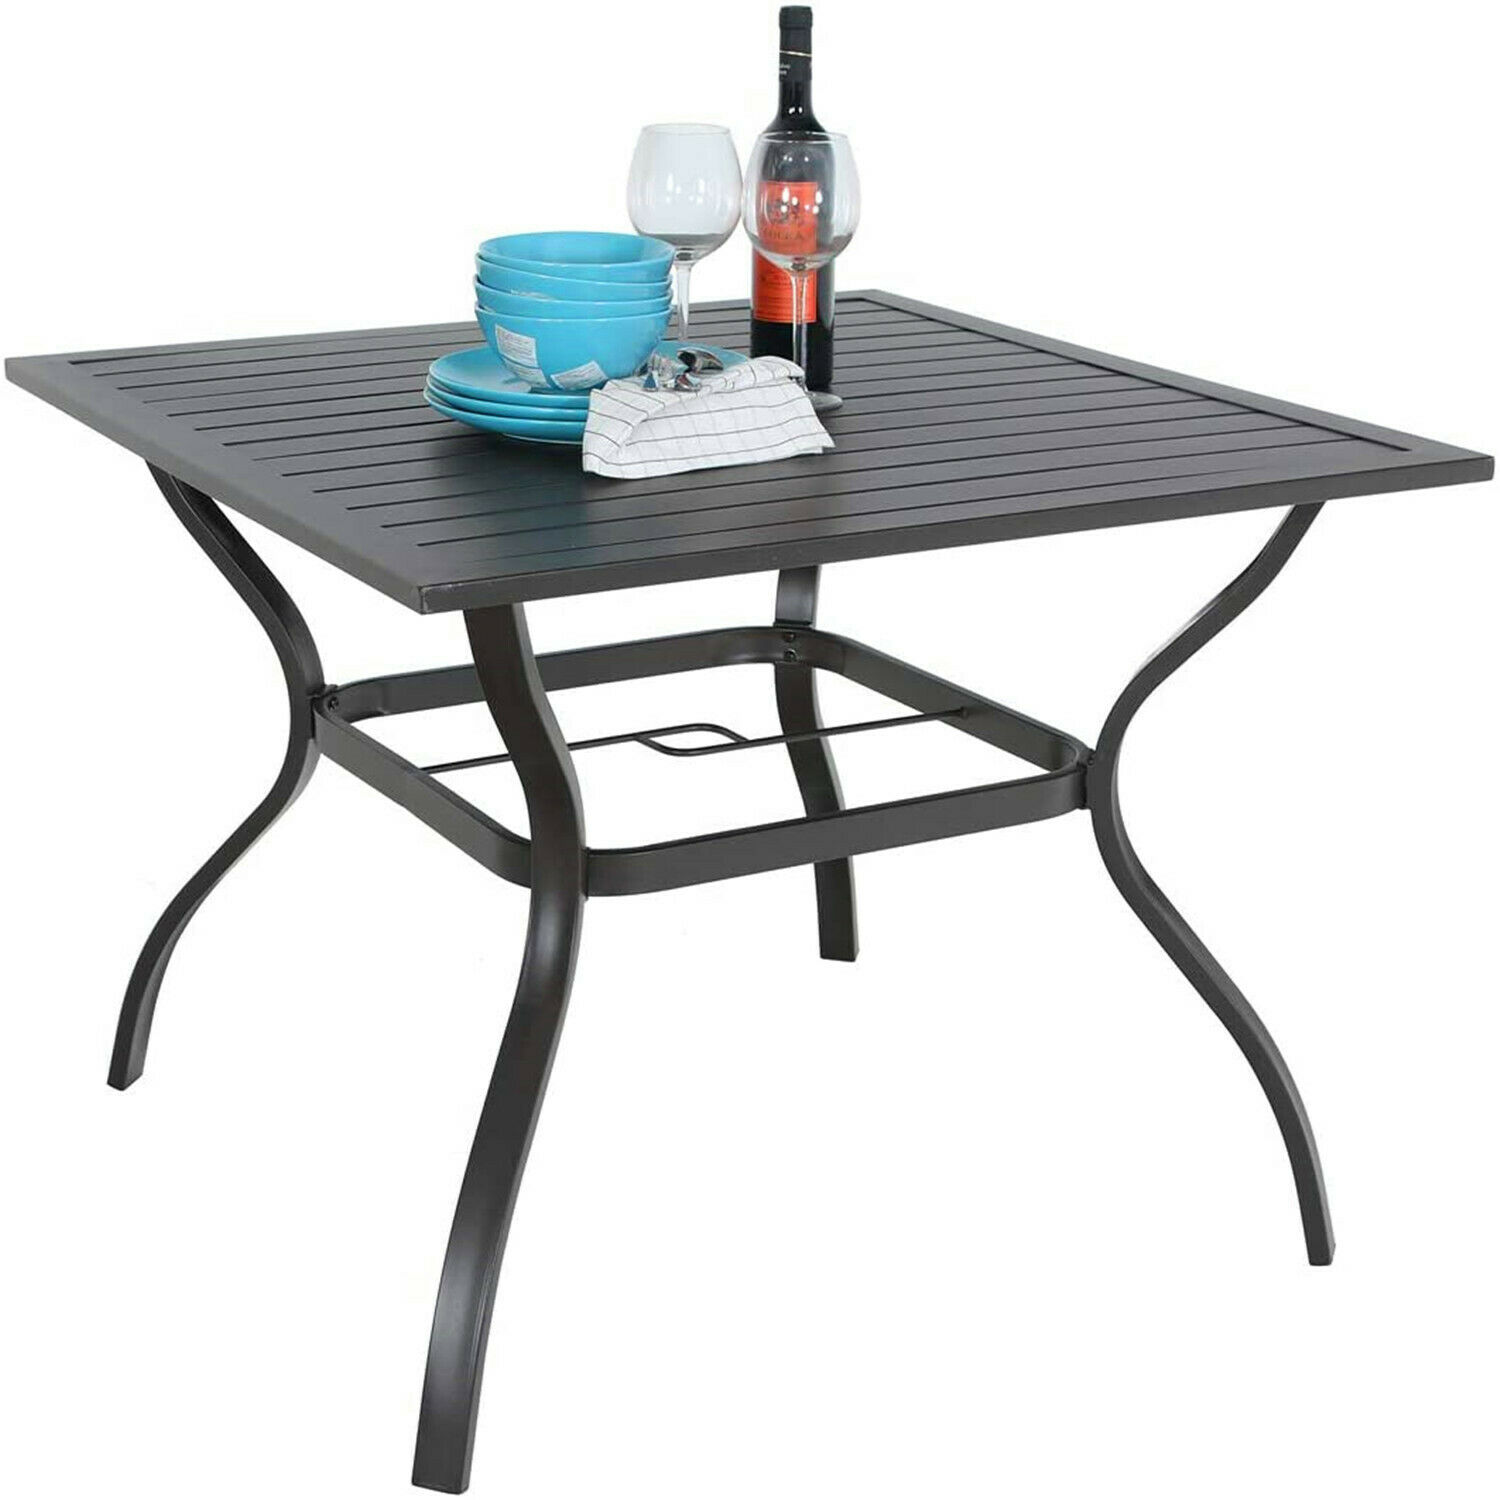 Outdoor Dining Table Square Patio Bistro Table With Umbrella Hole 37" X 37"